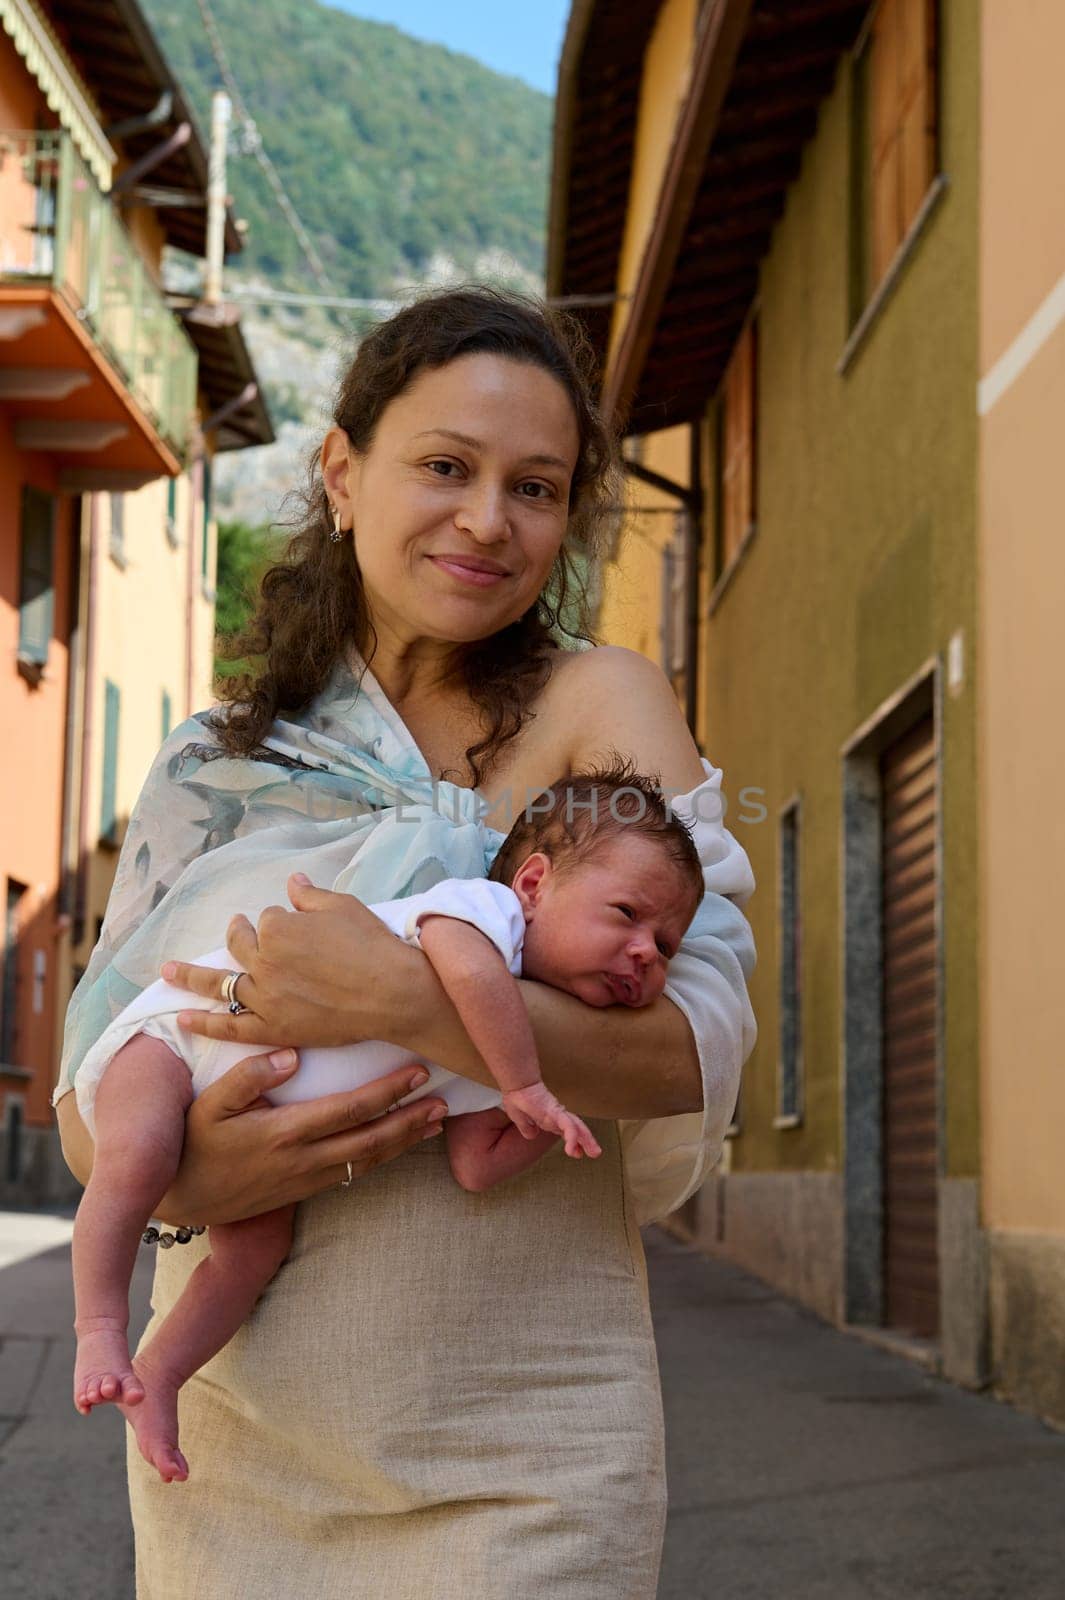 Beautiful woman holding her baby, smiling looking at camera, standing in cobblestone alley in Italian medieval village by artgf